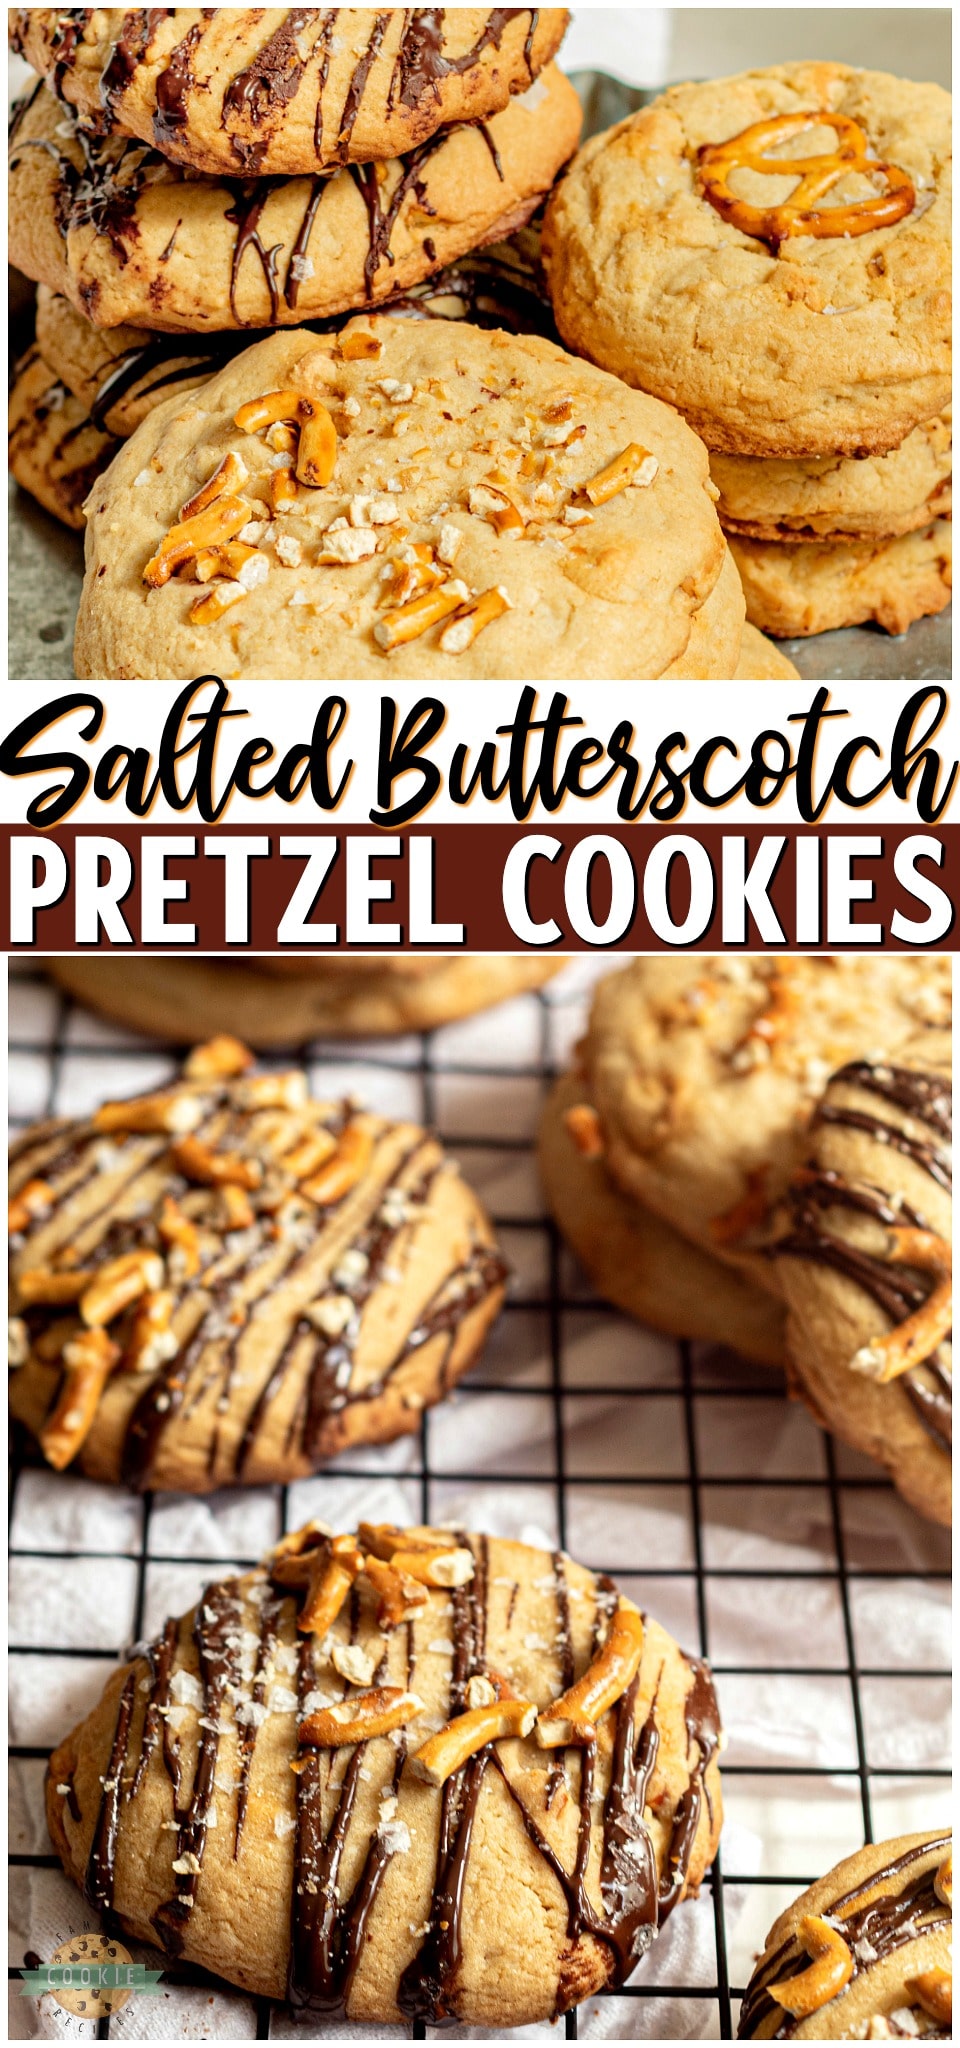 Sea Salt Butterscotch Pretzel Cookies are sweet and salty cookies that pack a little crunch and a whole lot of flavor! With sea salt, pretzels, butterscotch chips, and a chocolate drizzle these loaded cookies are a family favorite!